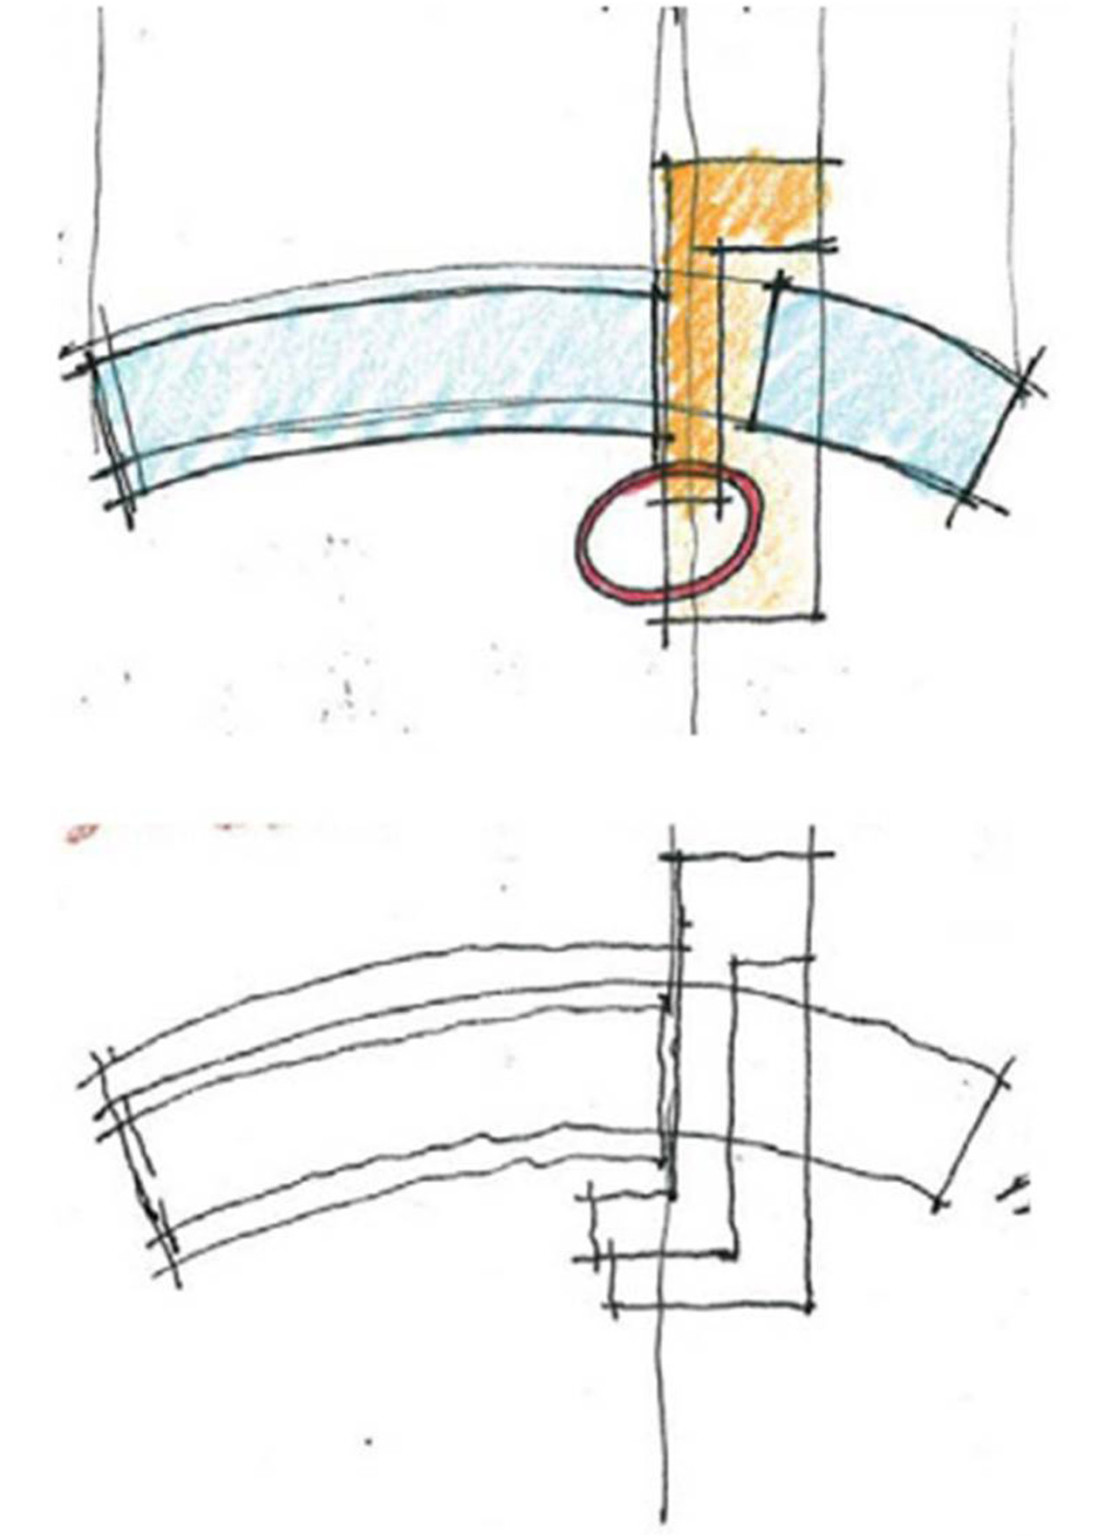 An initial hand drawn sketch of the structure with color coded portions at top